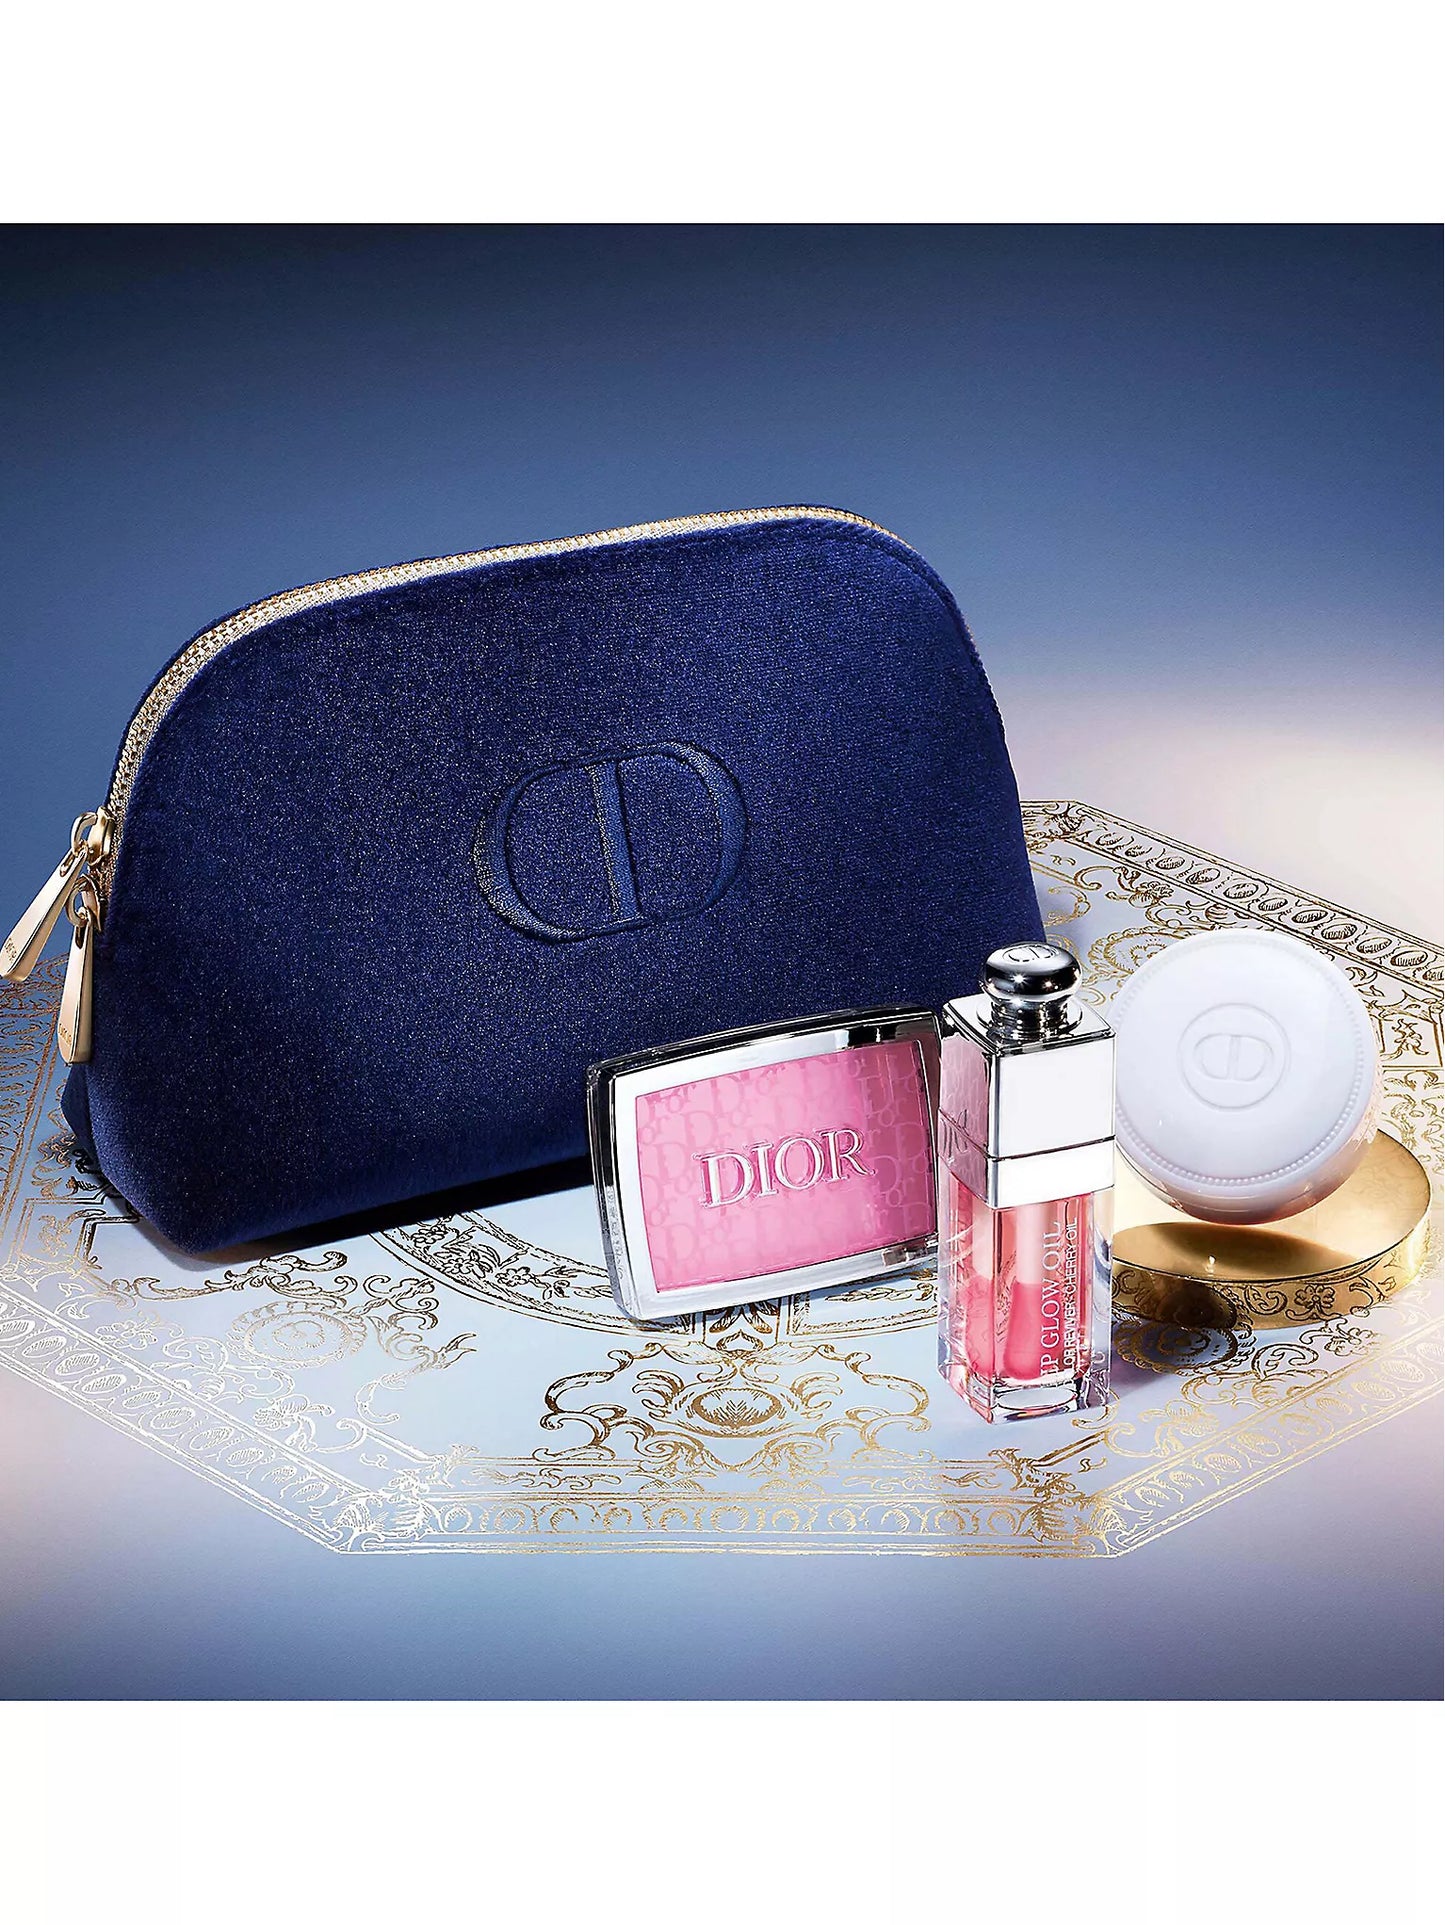 DIOR, The Natural Glow Ritual limited-edition gift set